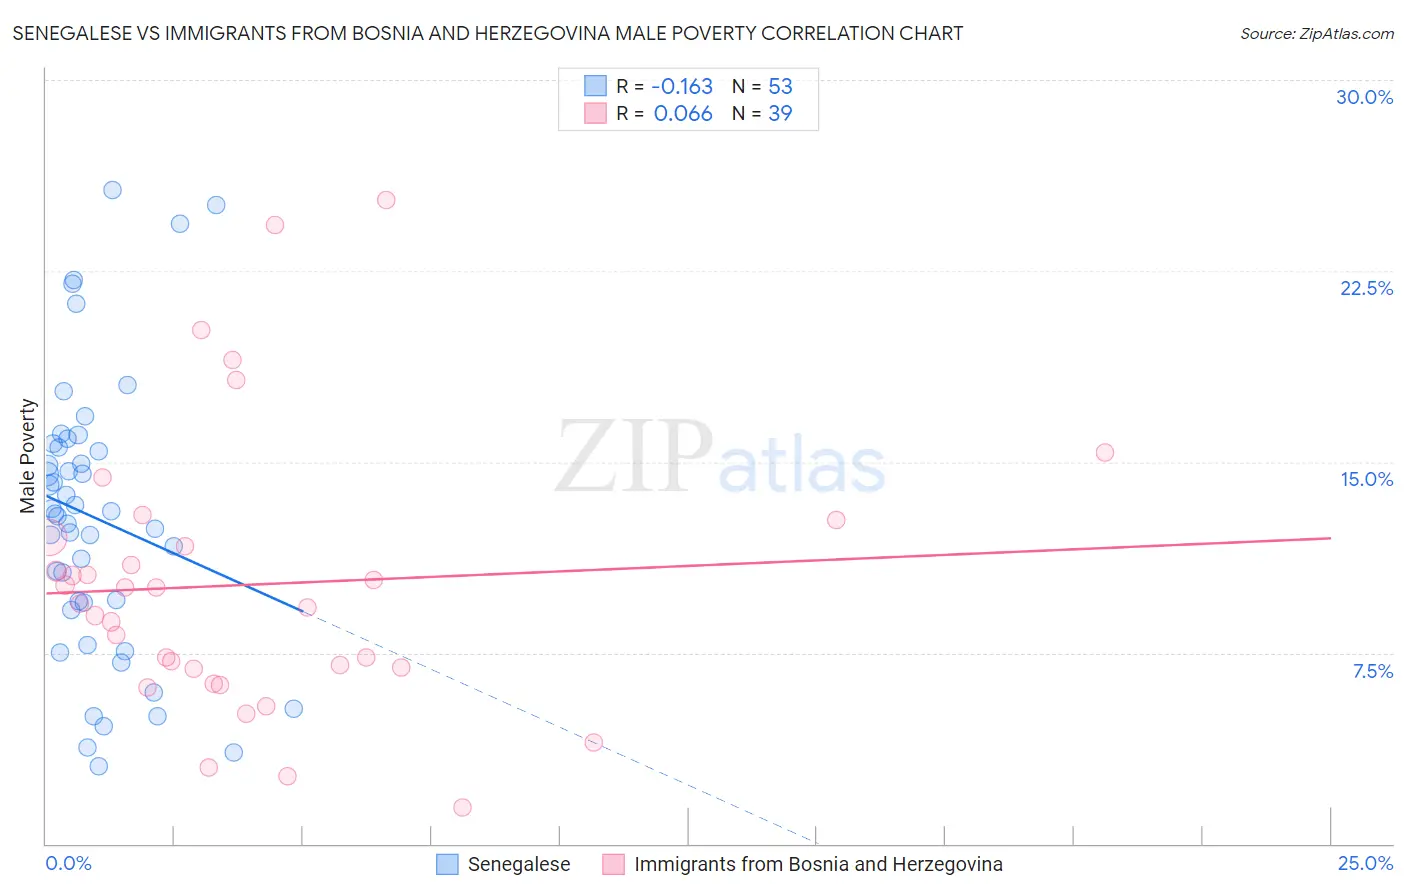 Senegalese vs Immigrants from Bosnia and Herzegovina Male Poverty